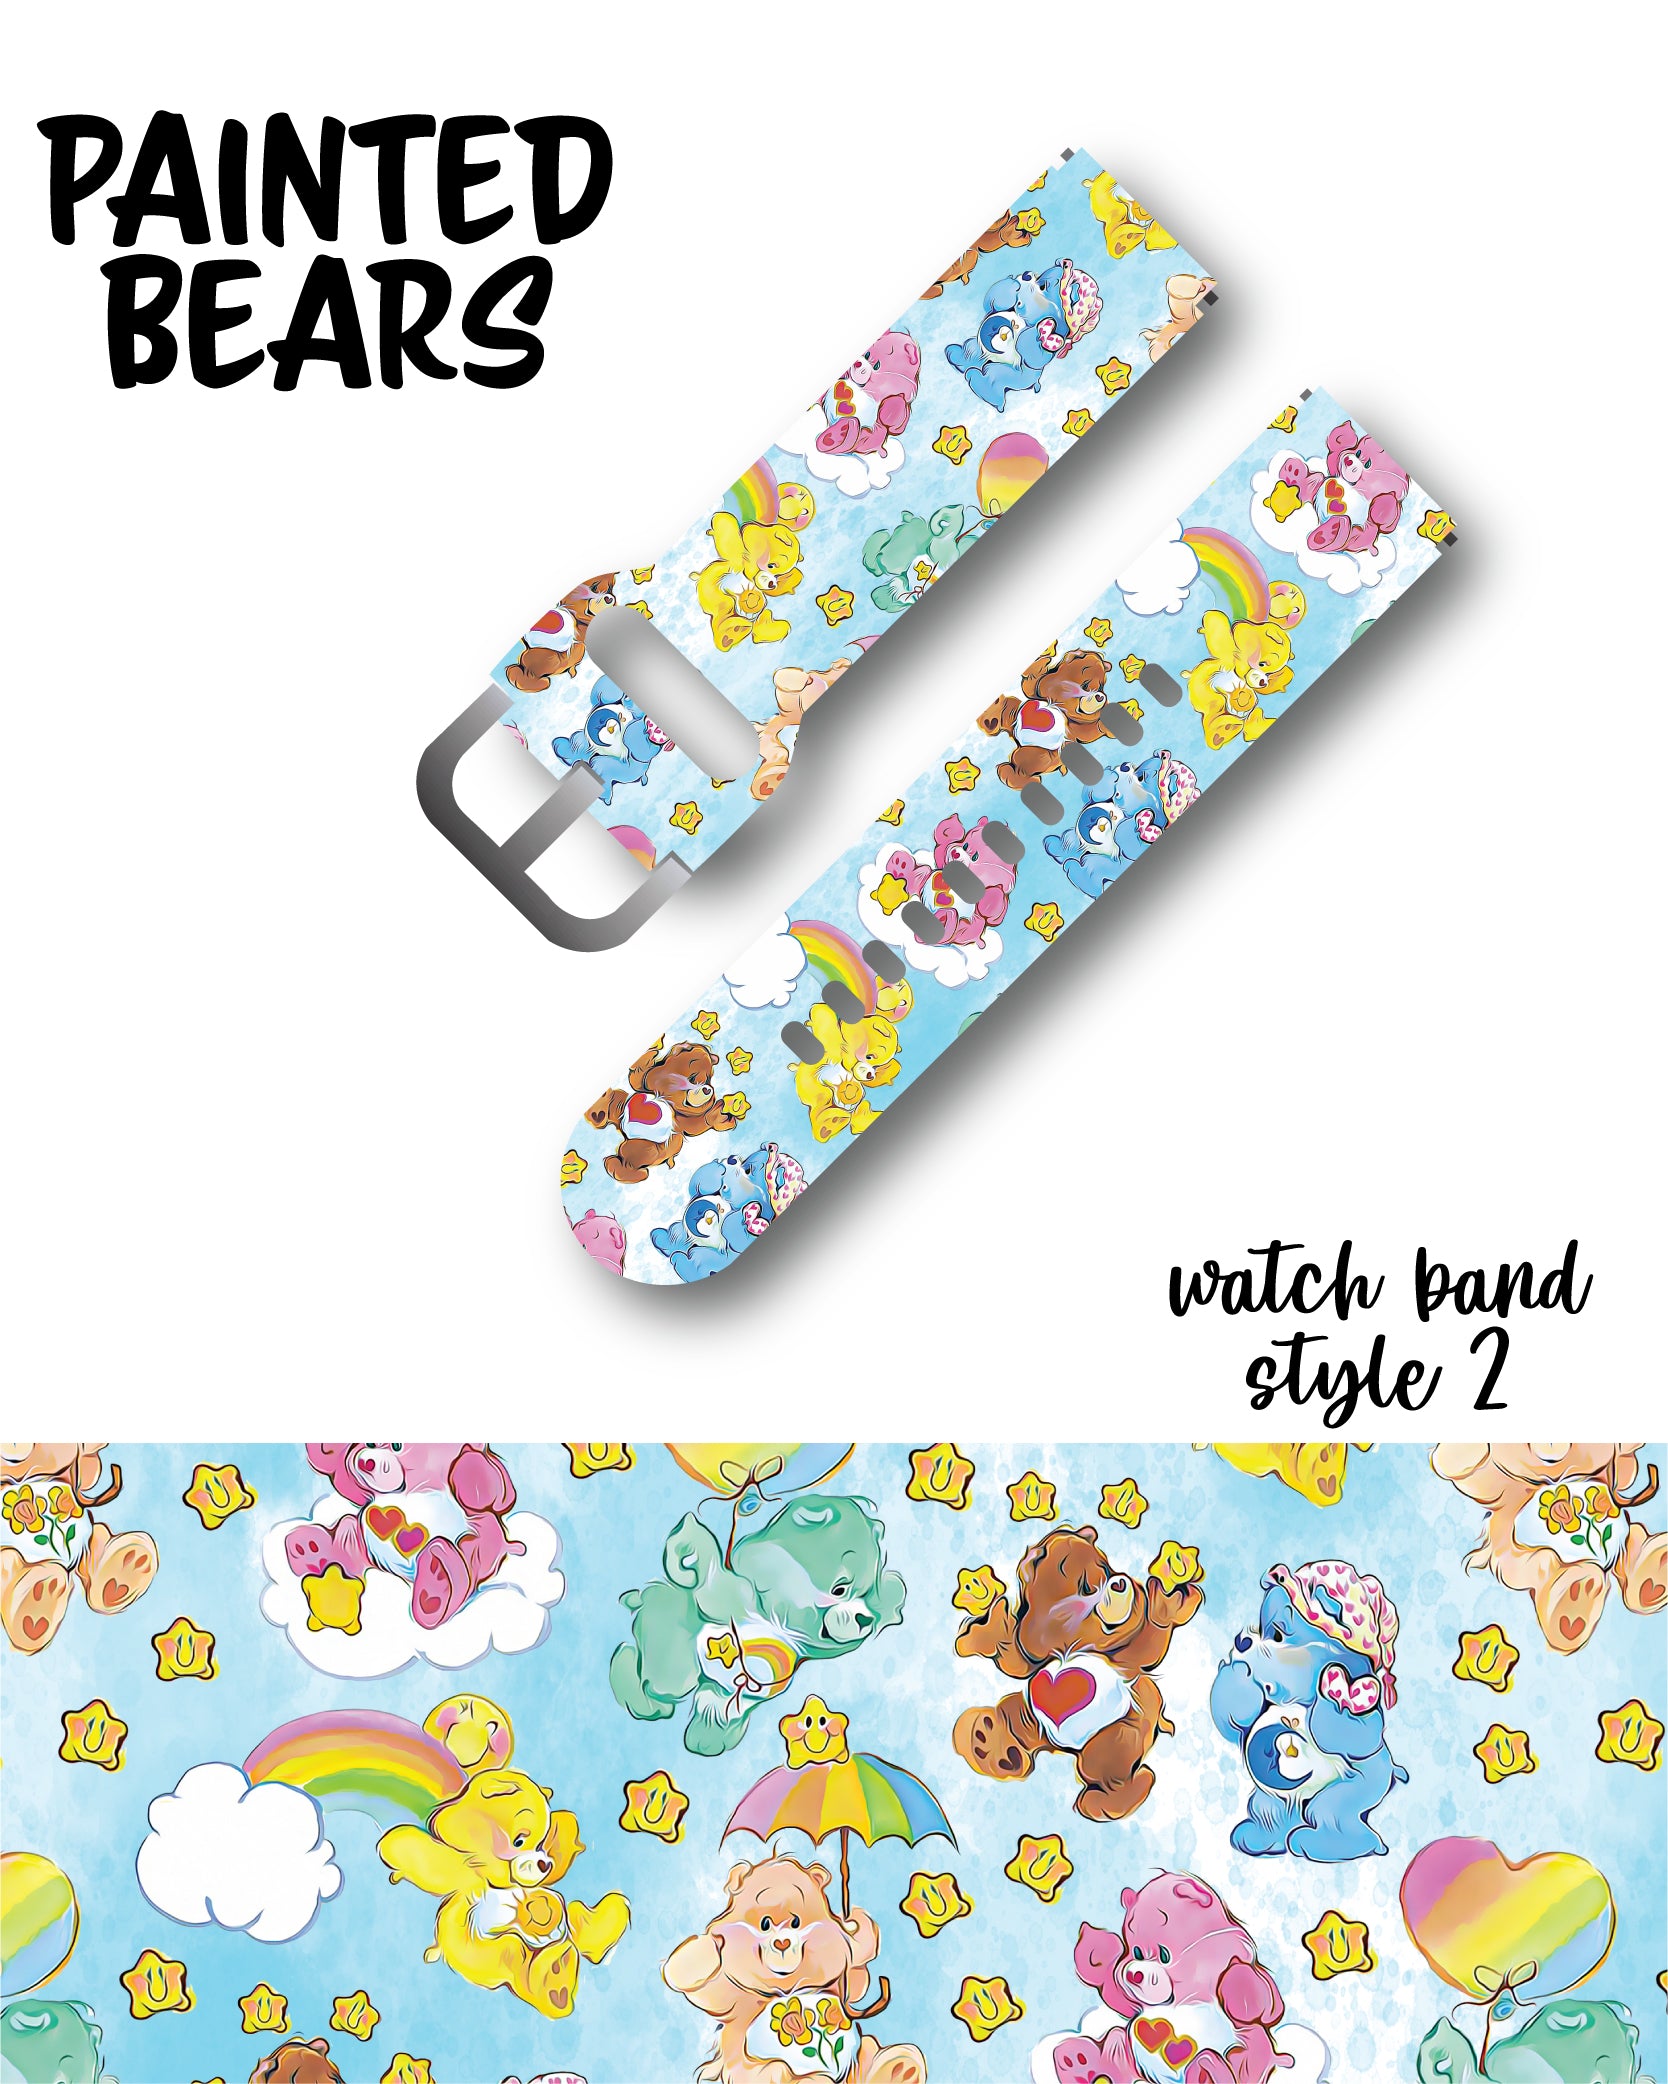 Painted Bears Watch Band Style 2